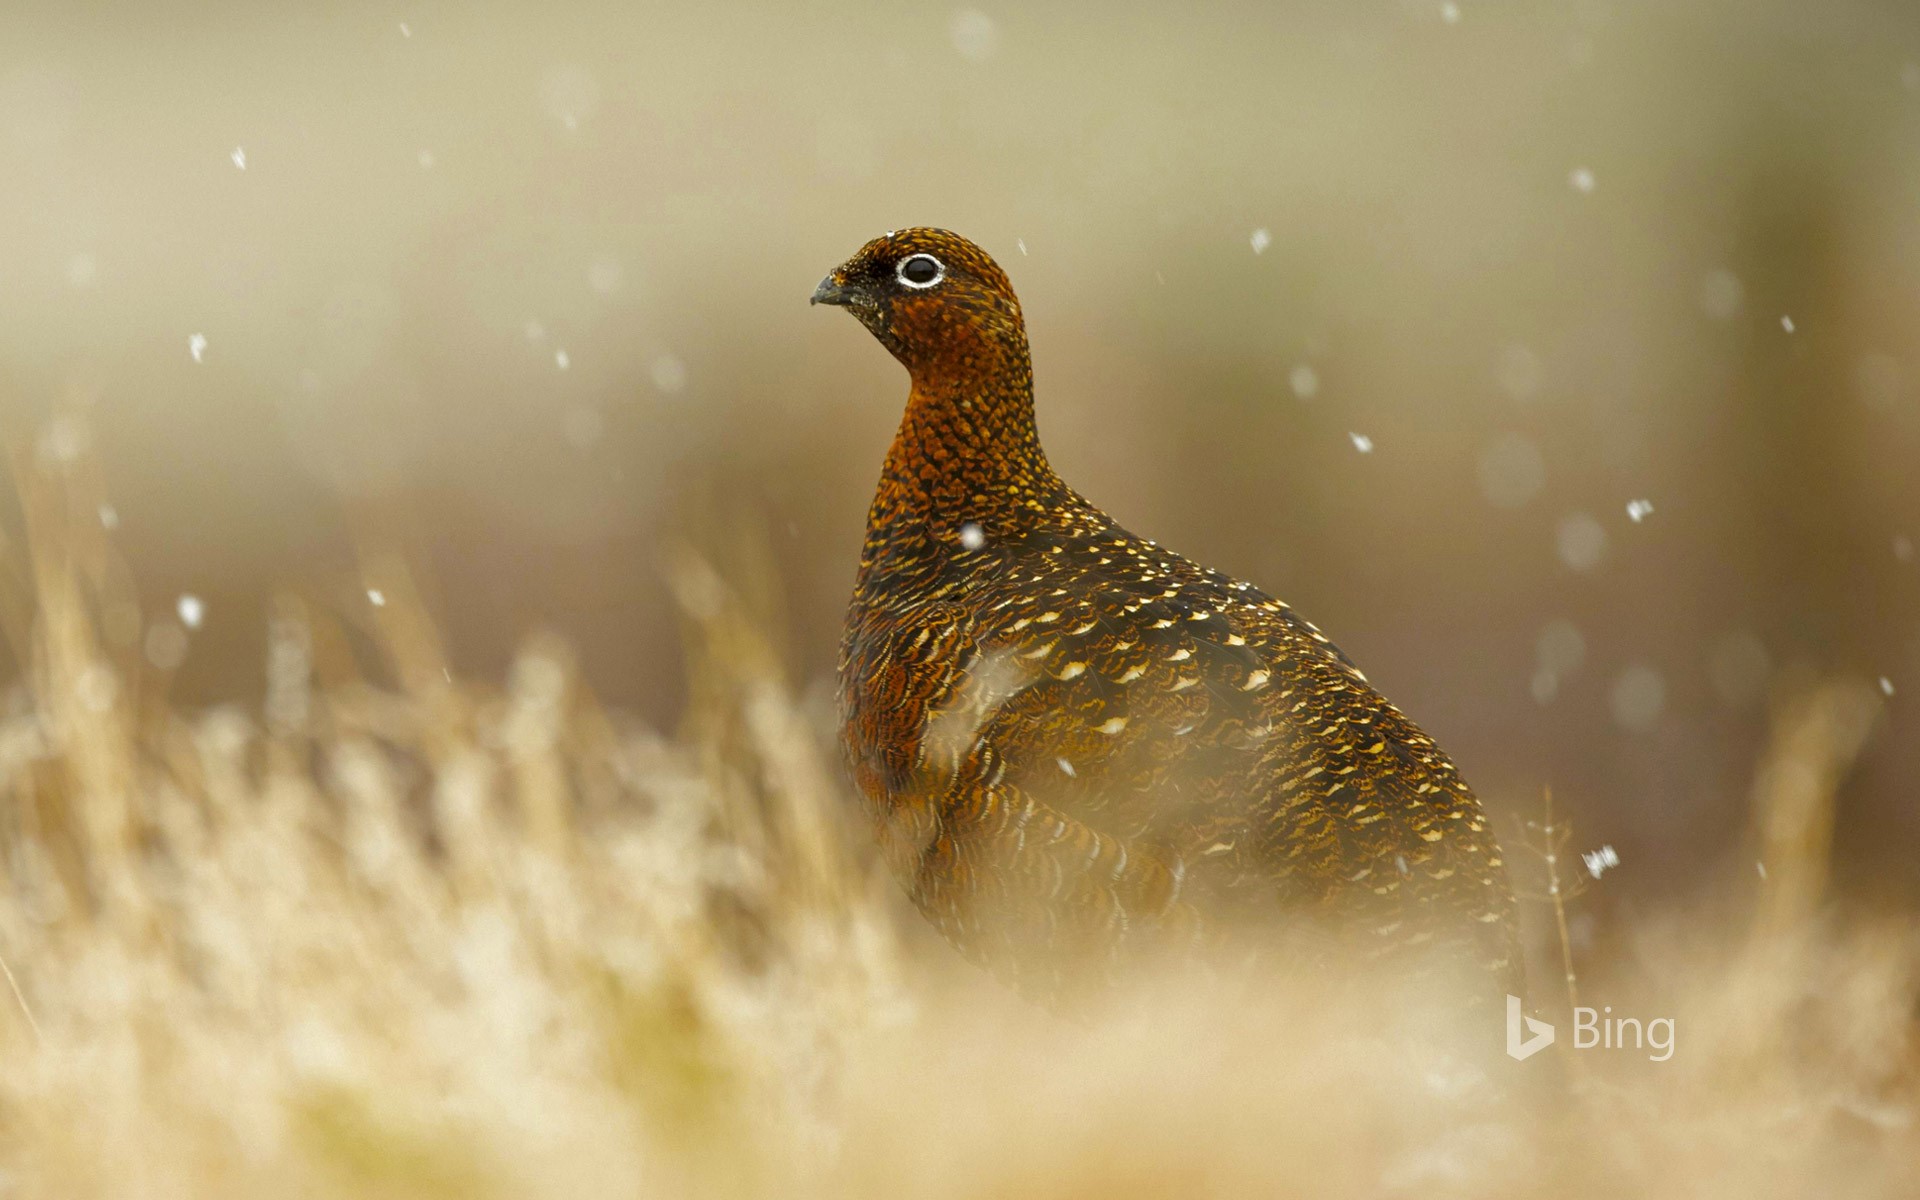 Red grouse in the Scottish Highlands